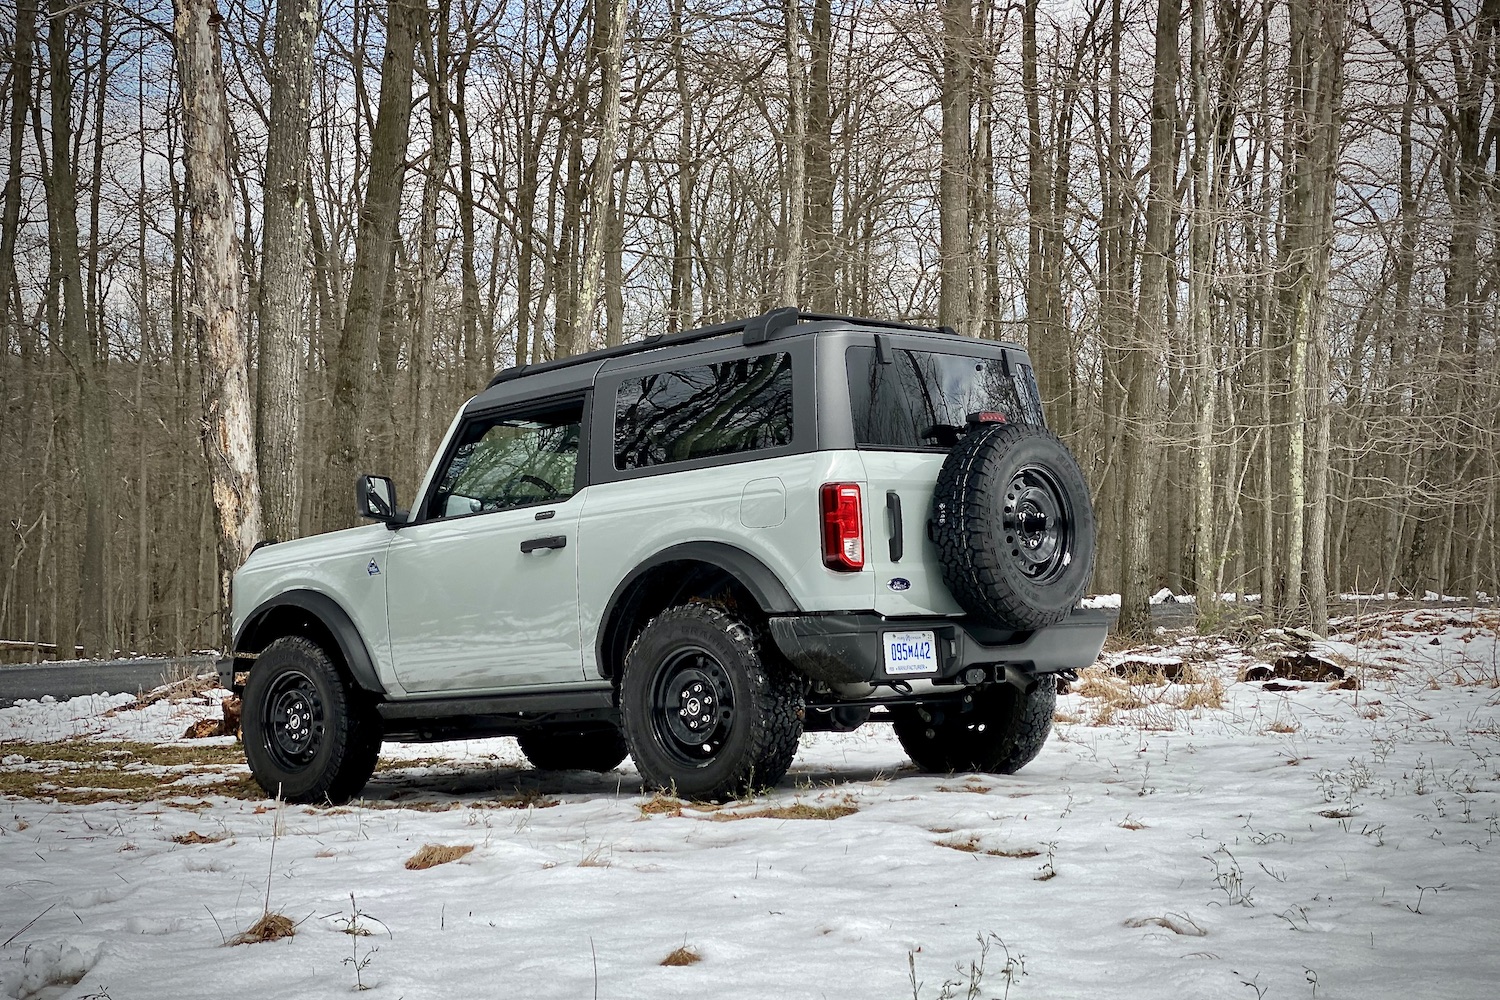 Rear end angle of 2021 Ford Bronco from driver's side in a snowy field with trees in the back.